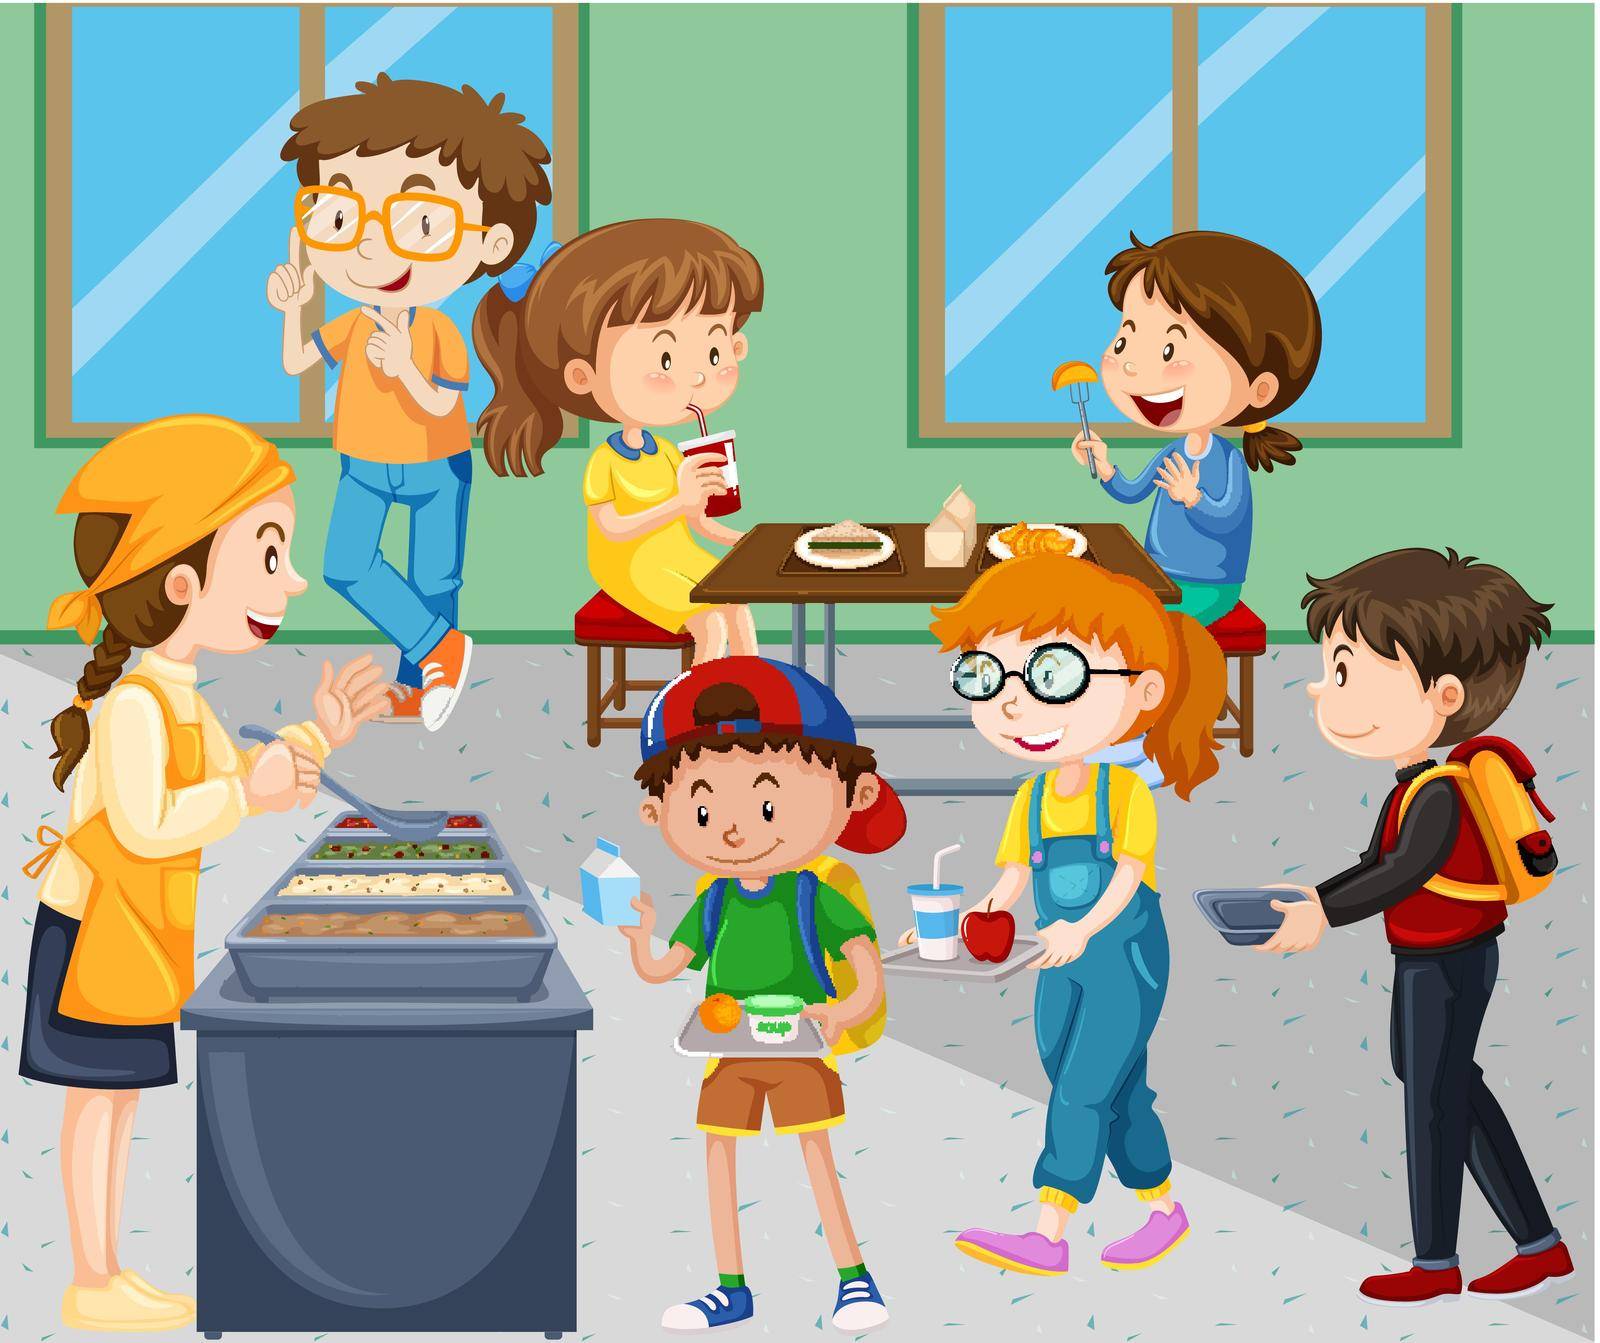 Children eating lunch in cafeteria illustration